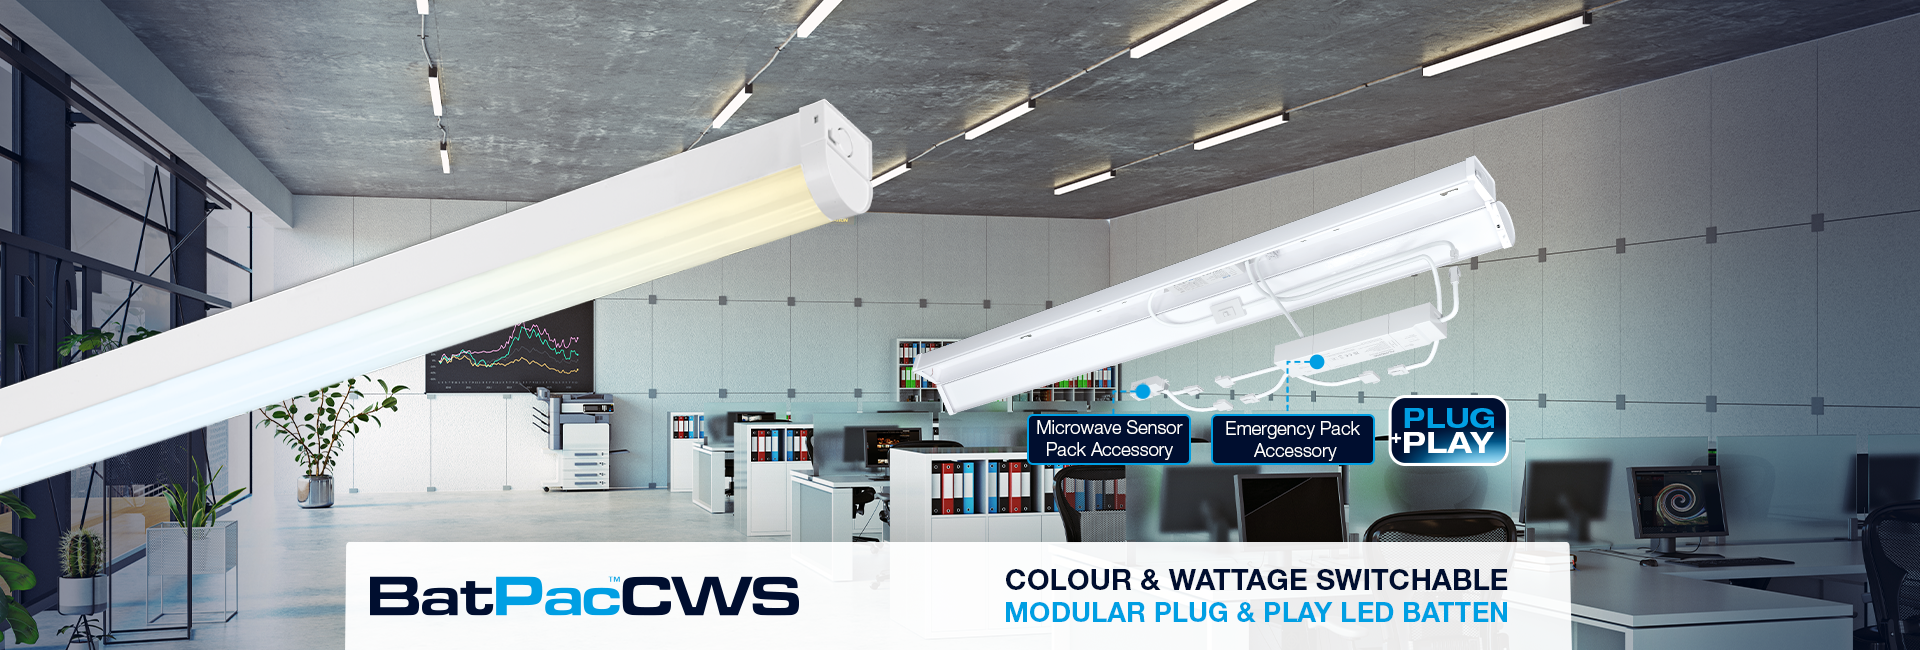 Show products in category Colour & Wattage Switchable Plug & Play LED Batten